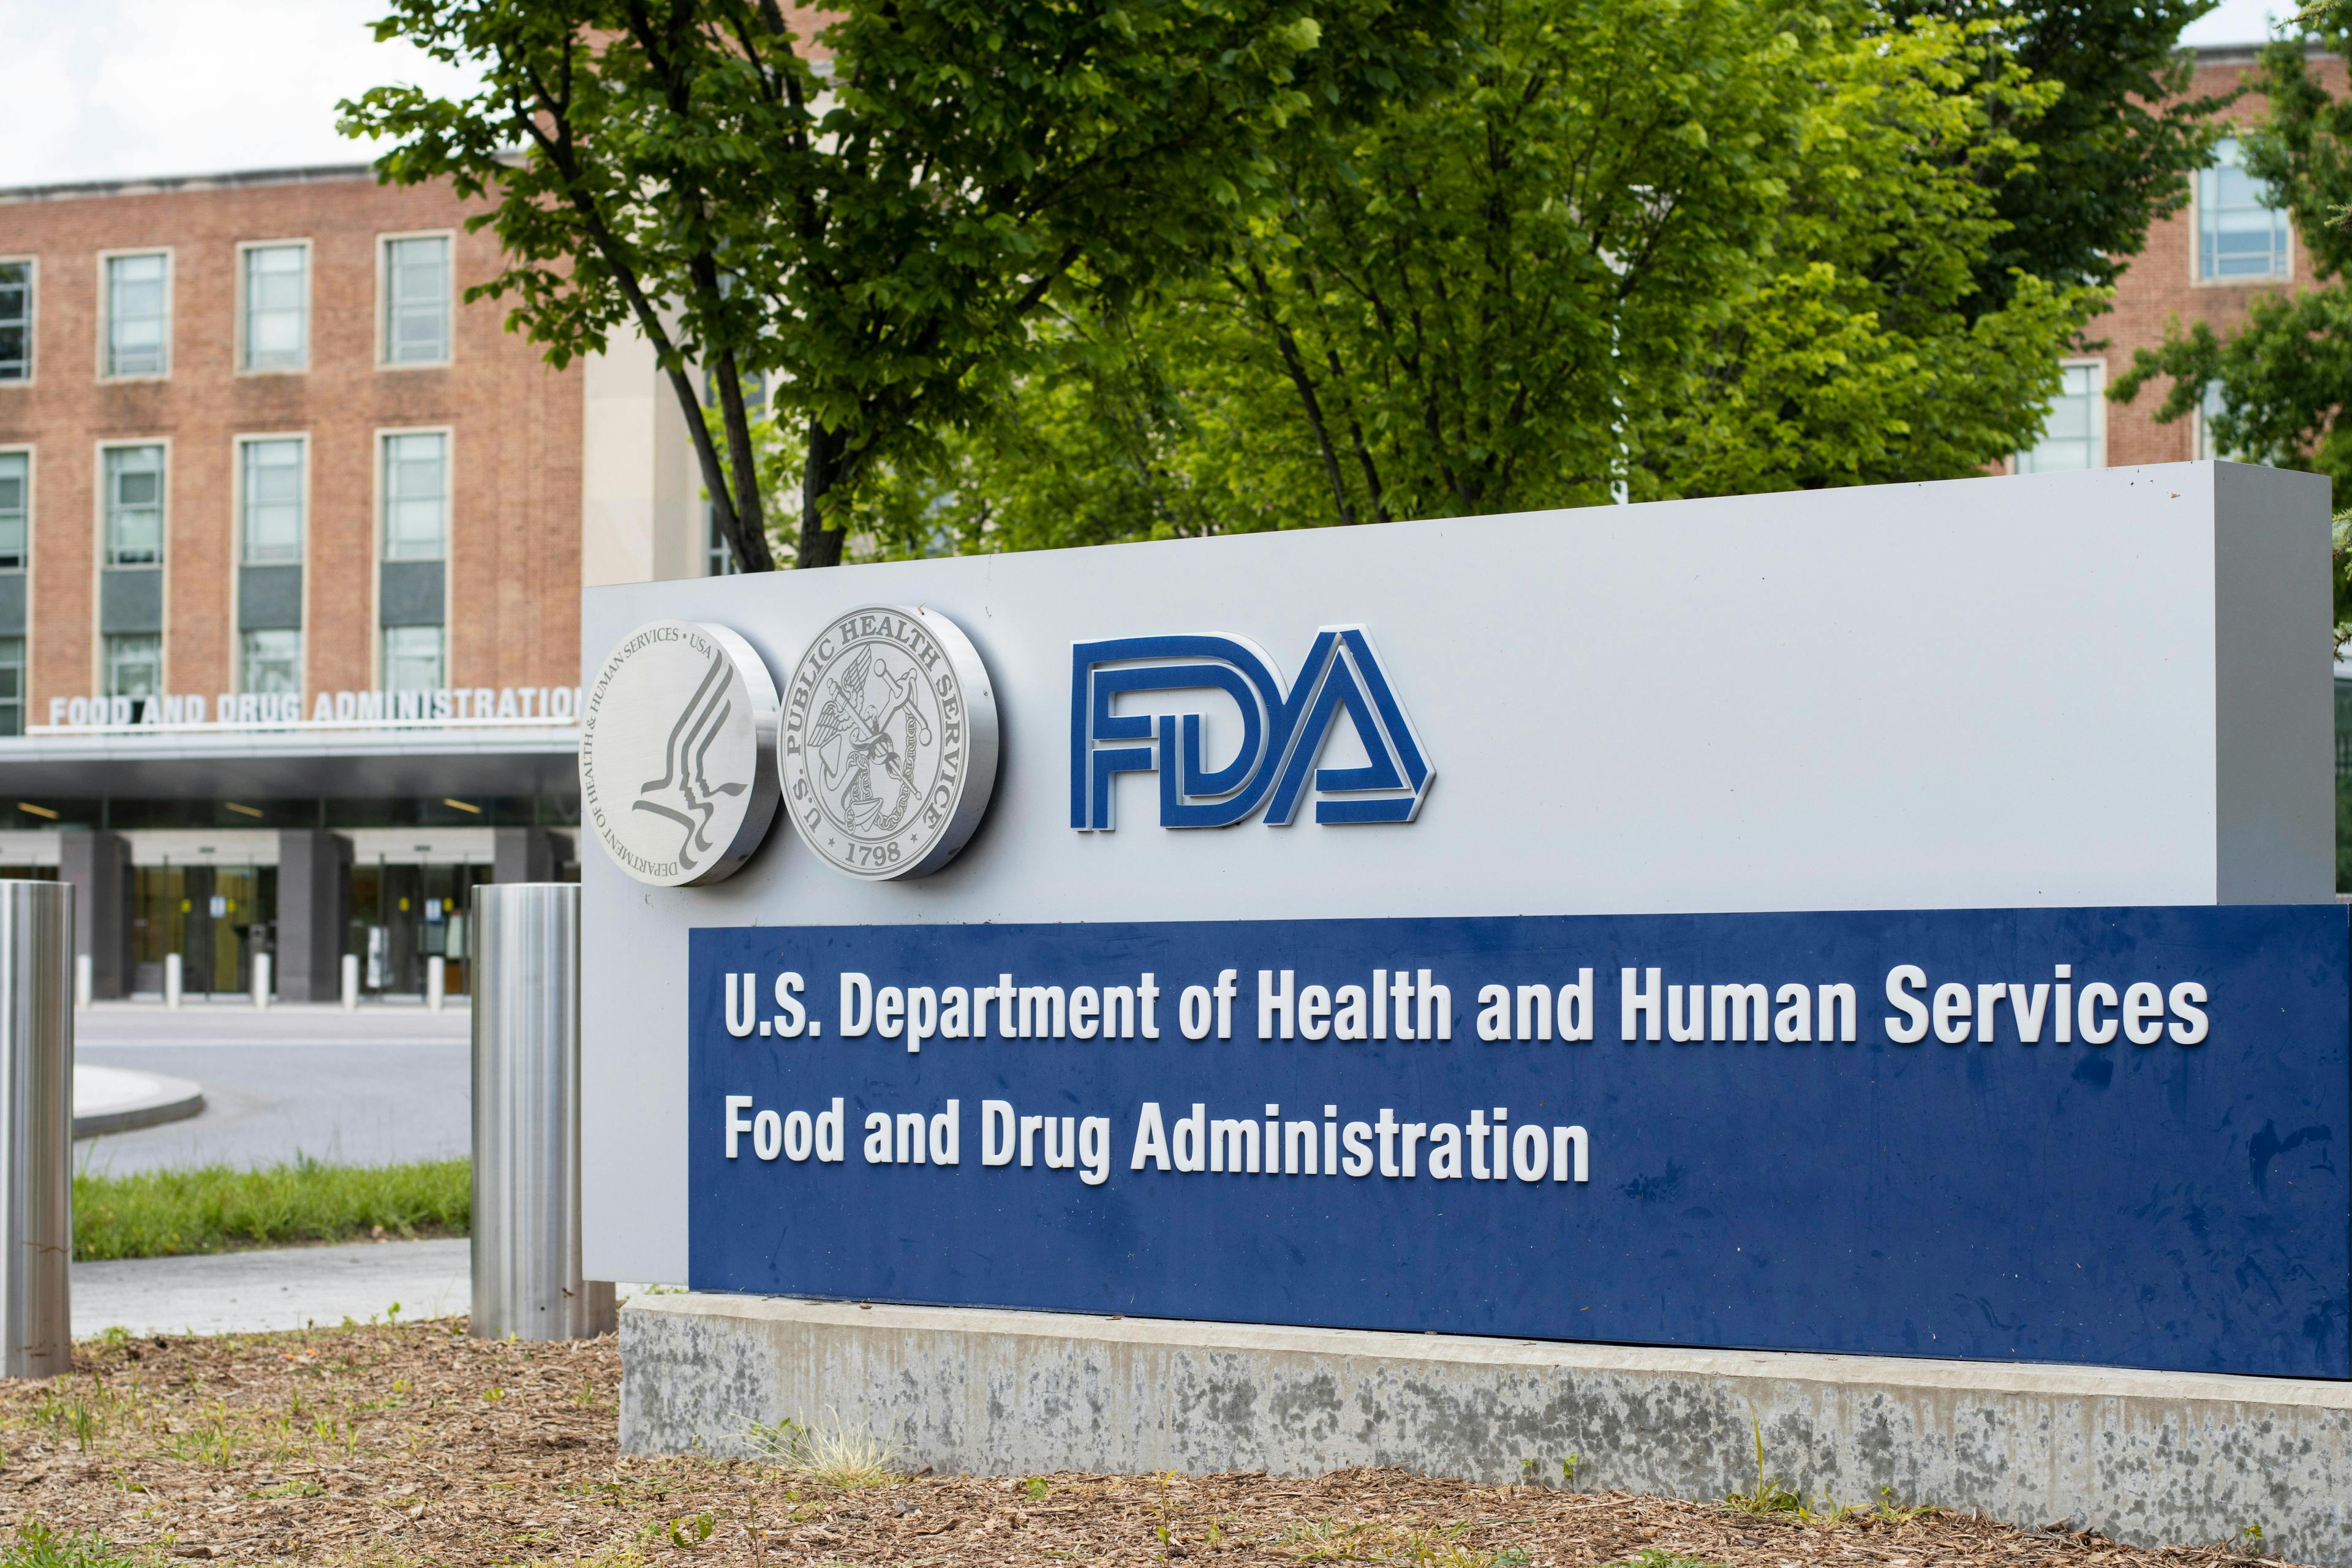 FDA Expands Tenofovir Alafenamide Indication to Treat HBV in Patients as Young as 6